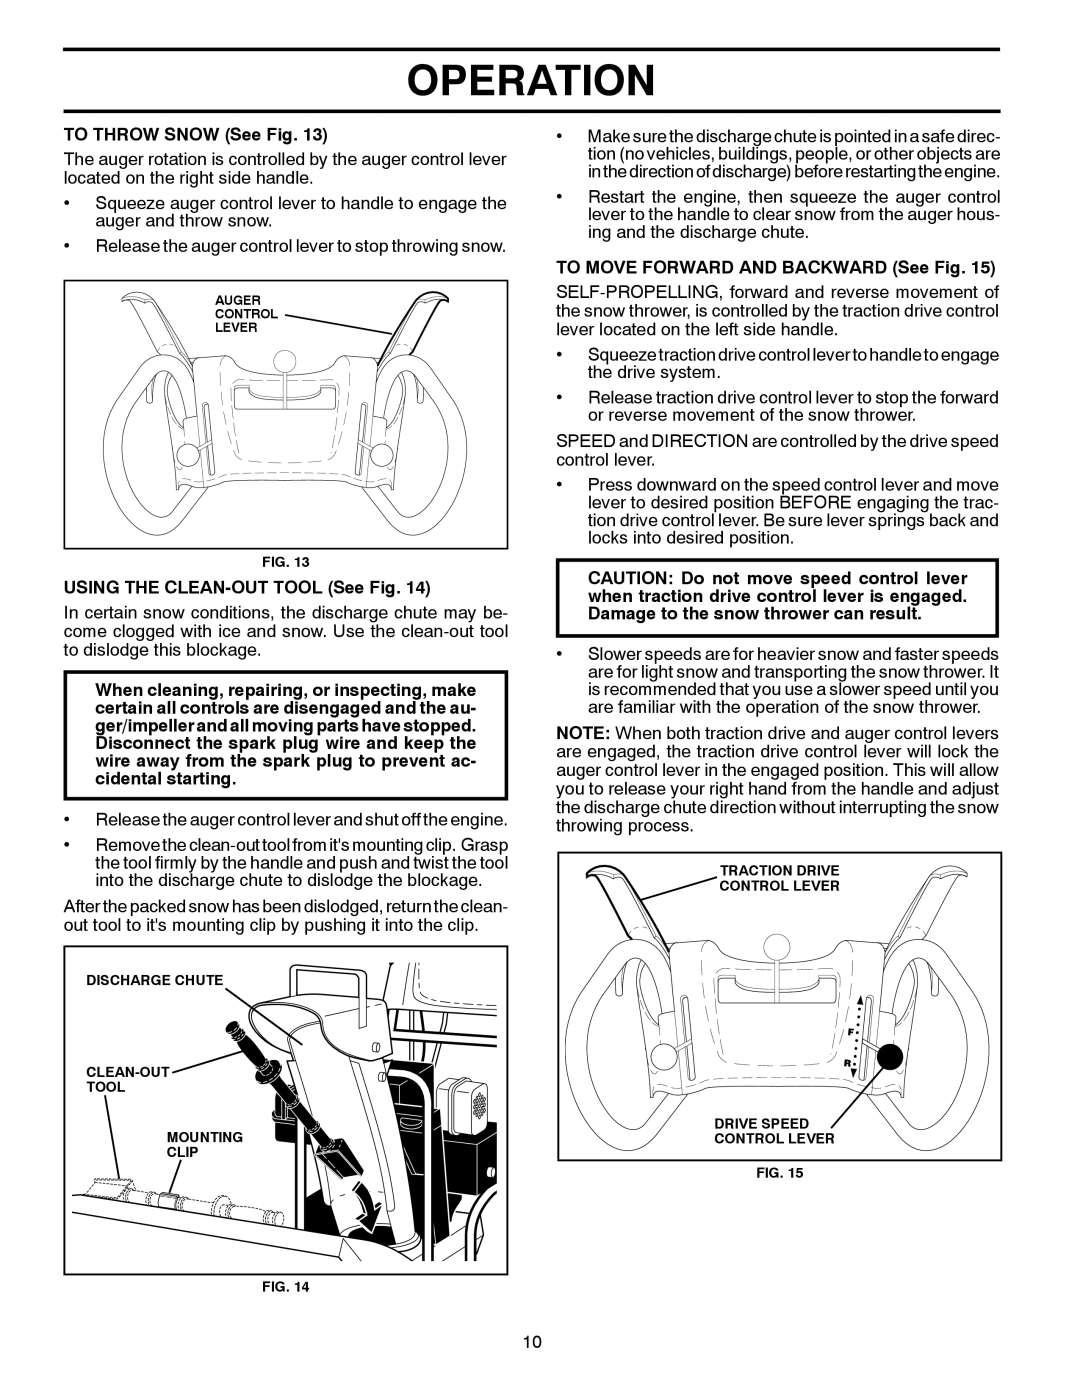 Poulan 96192003300, XT824ES Operation, TO THROW SNOW See Fig, USING THE CLEAN-OUT TOOL See Fig, Auger Control Lever 